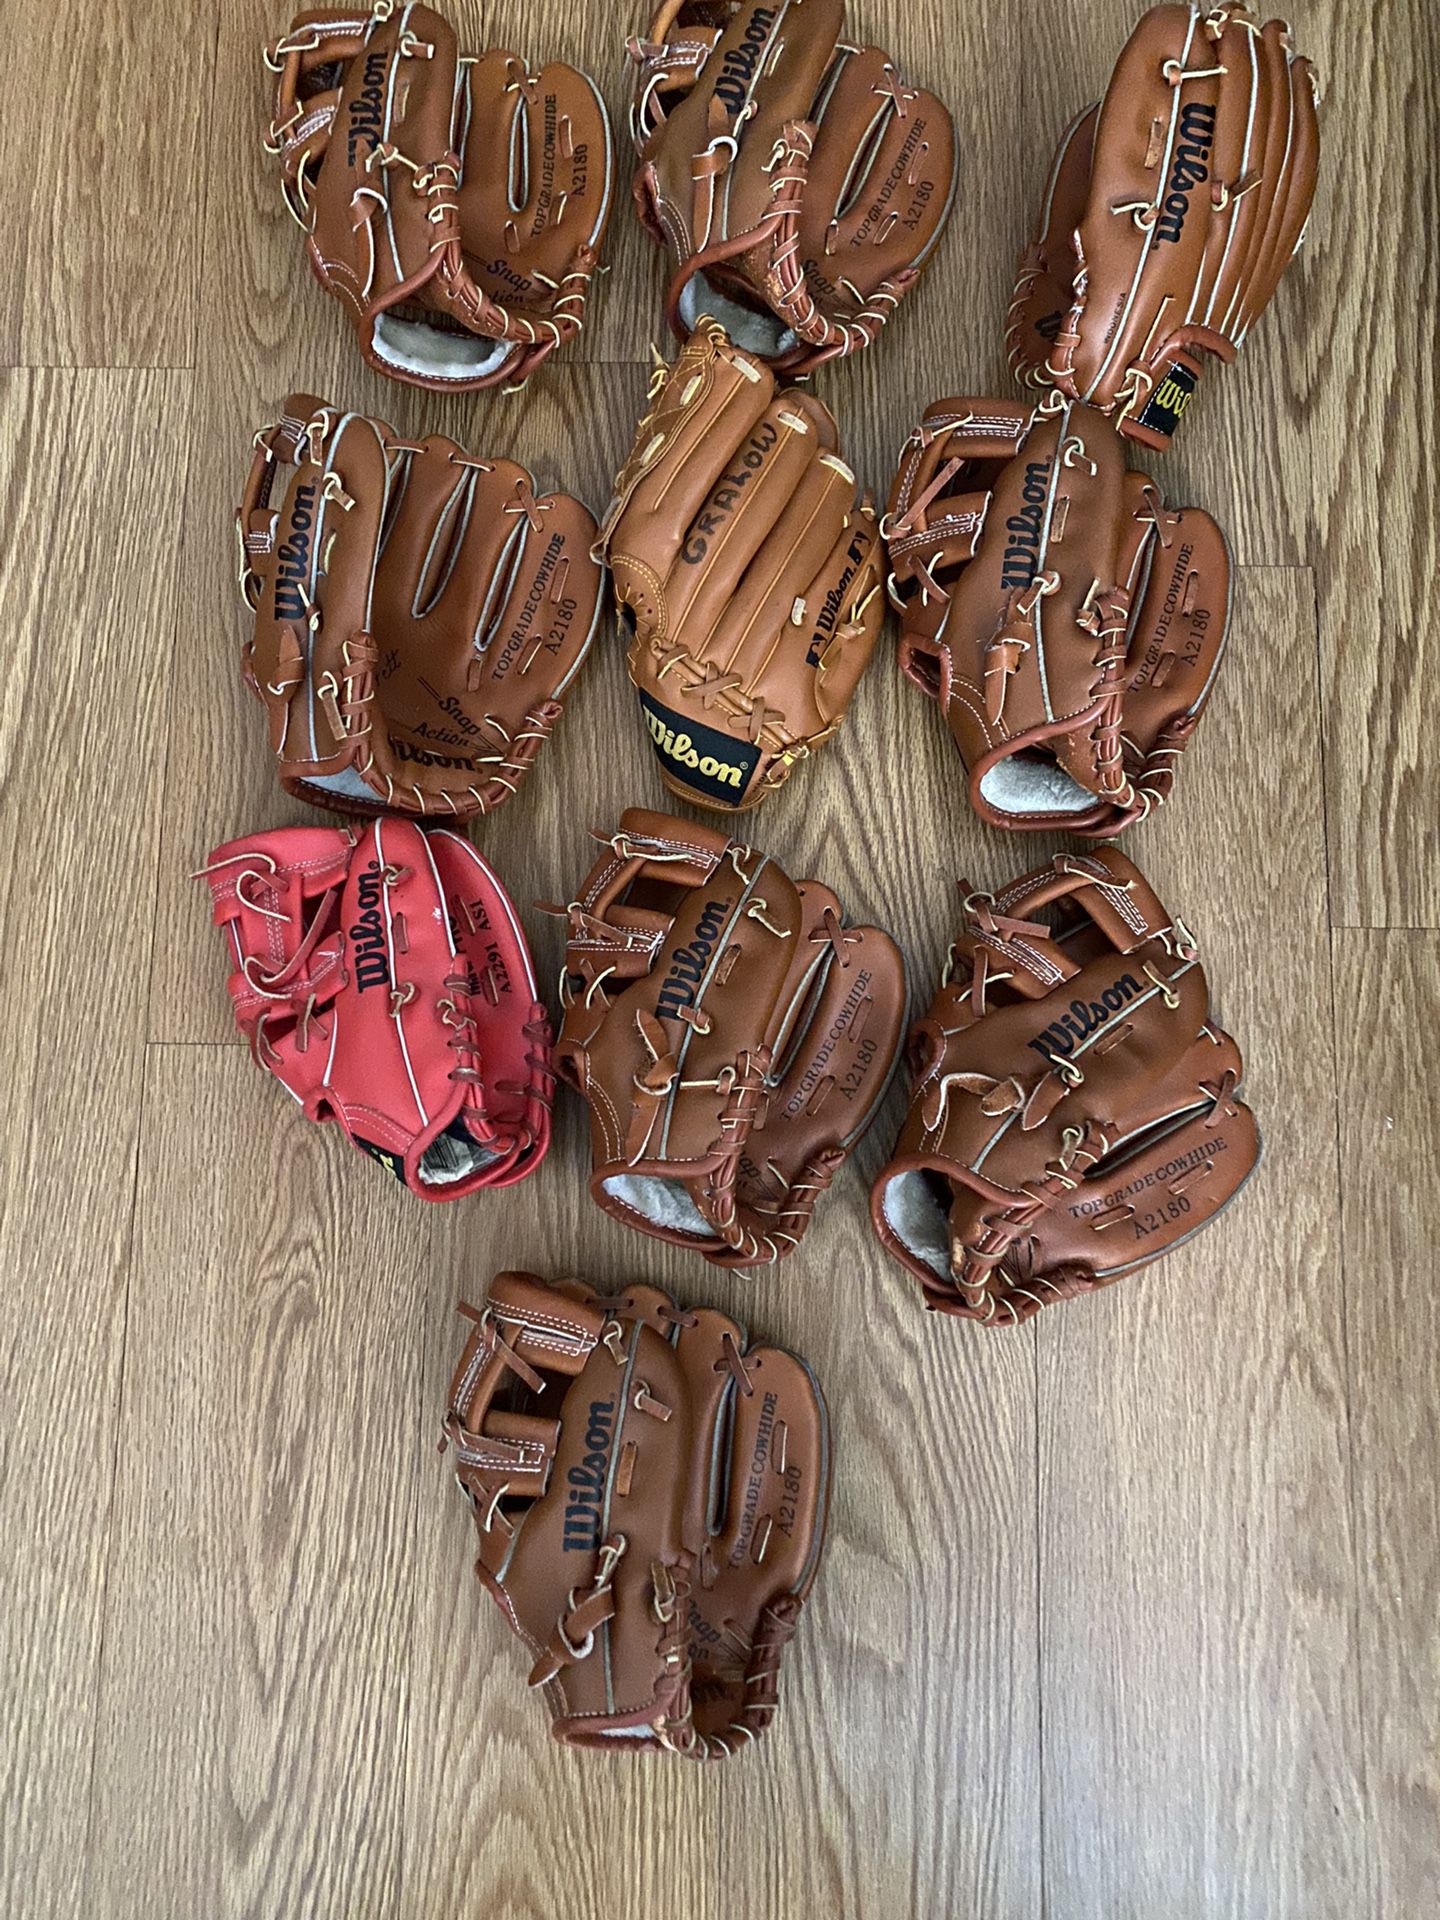 Little League  Baseball Gloves Used Excellent condition Wilson